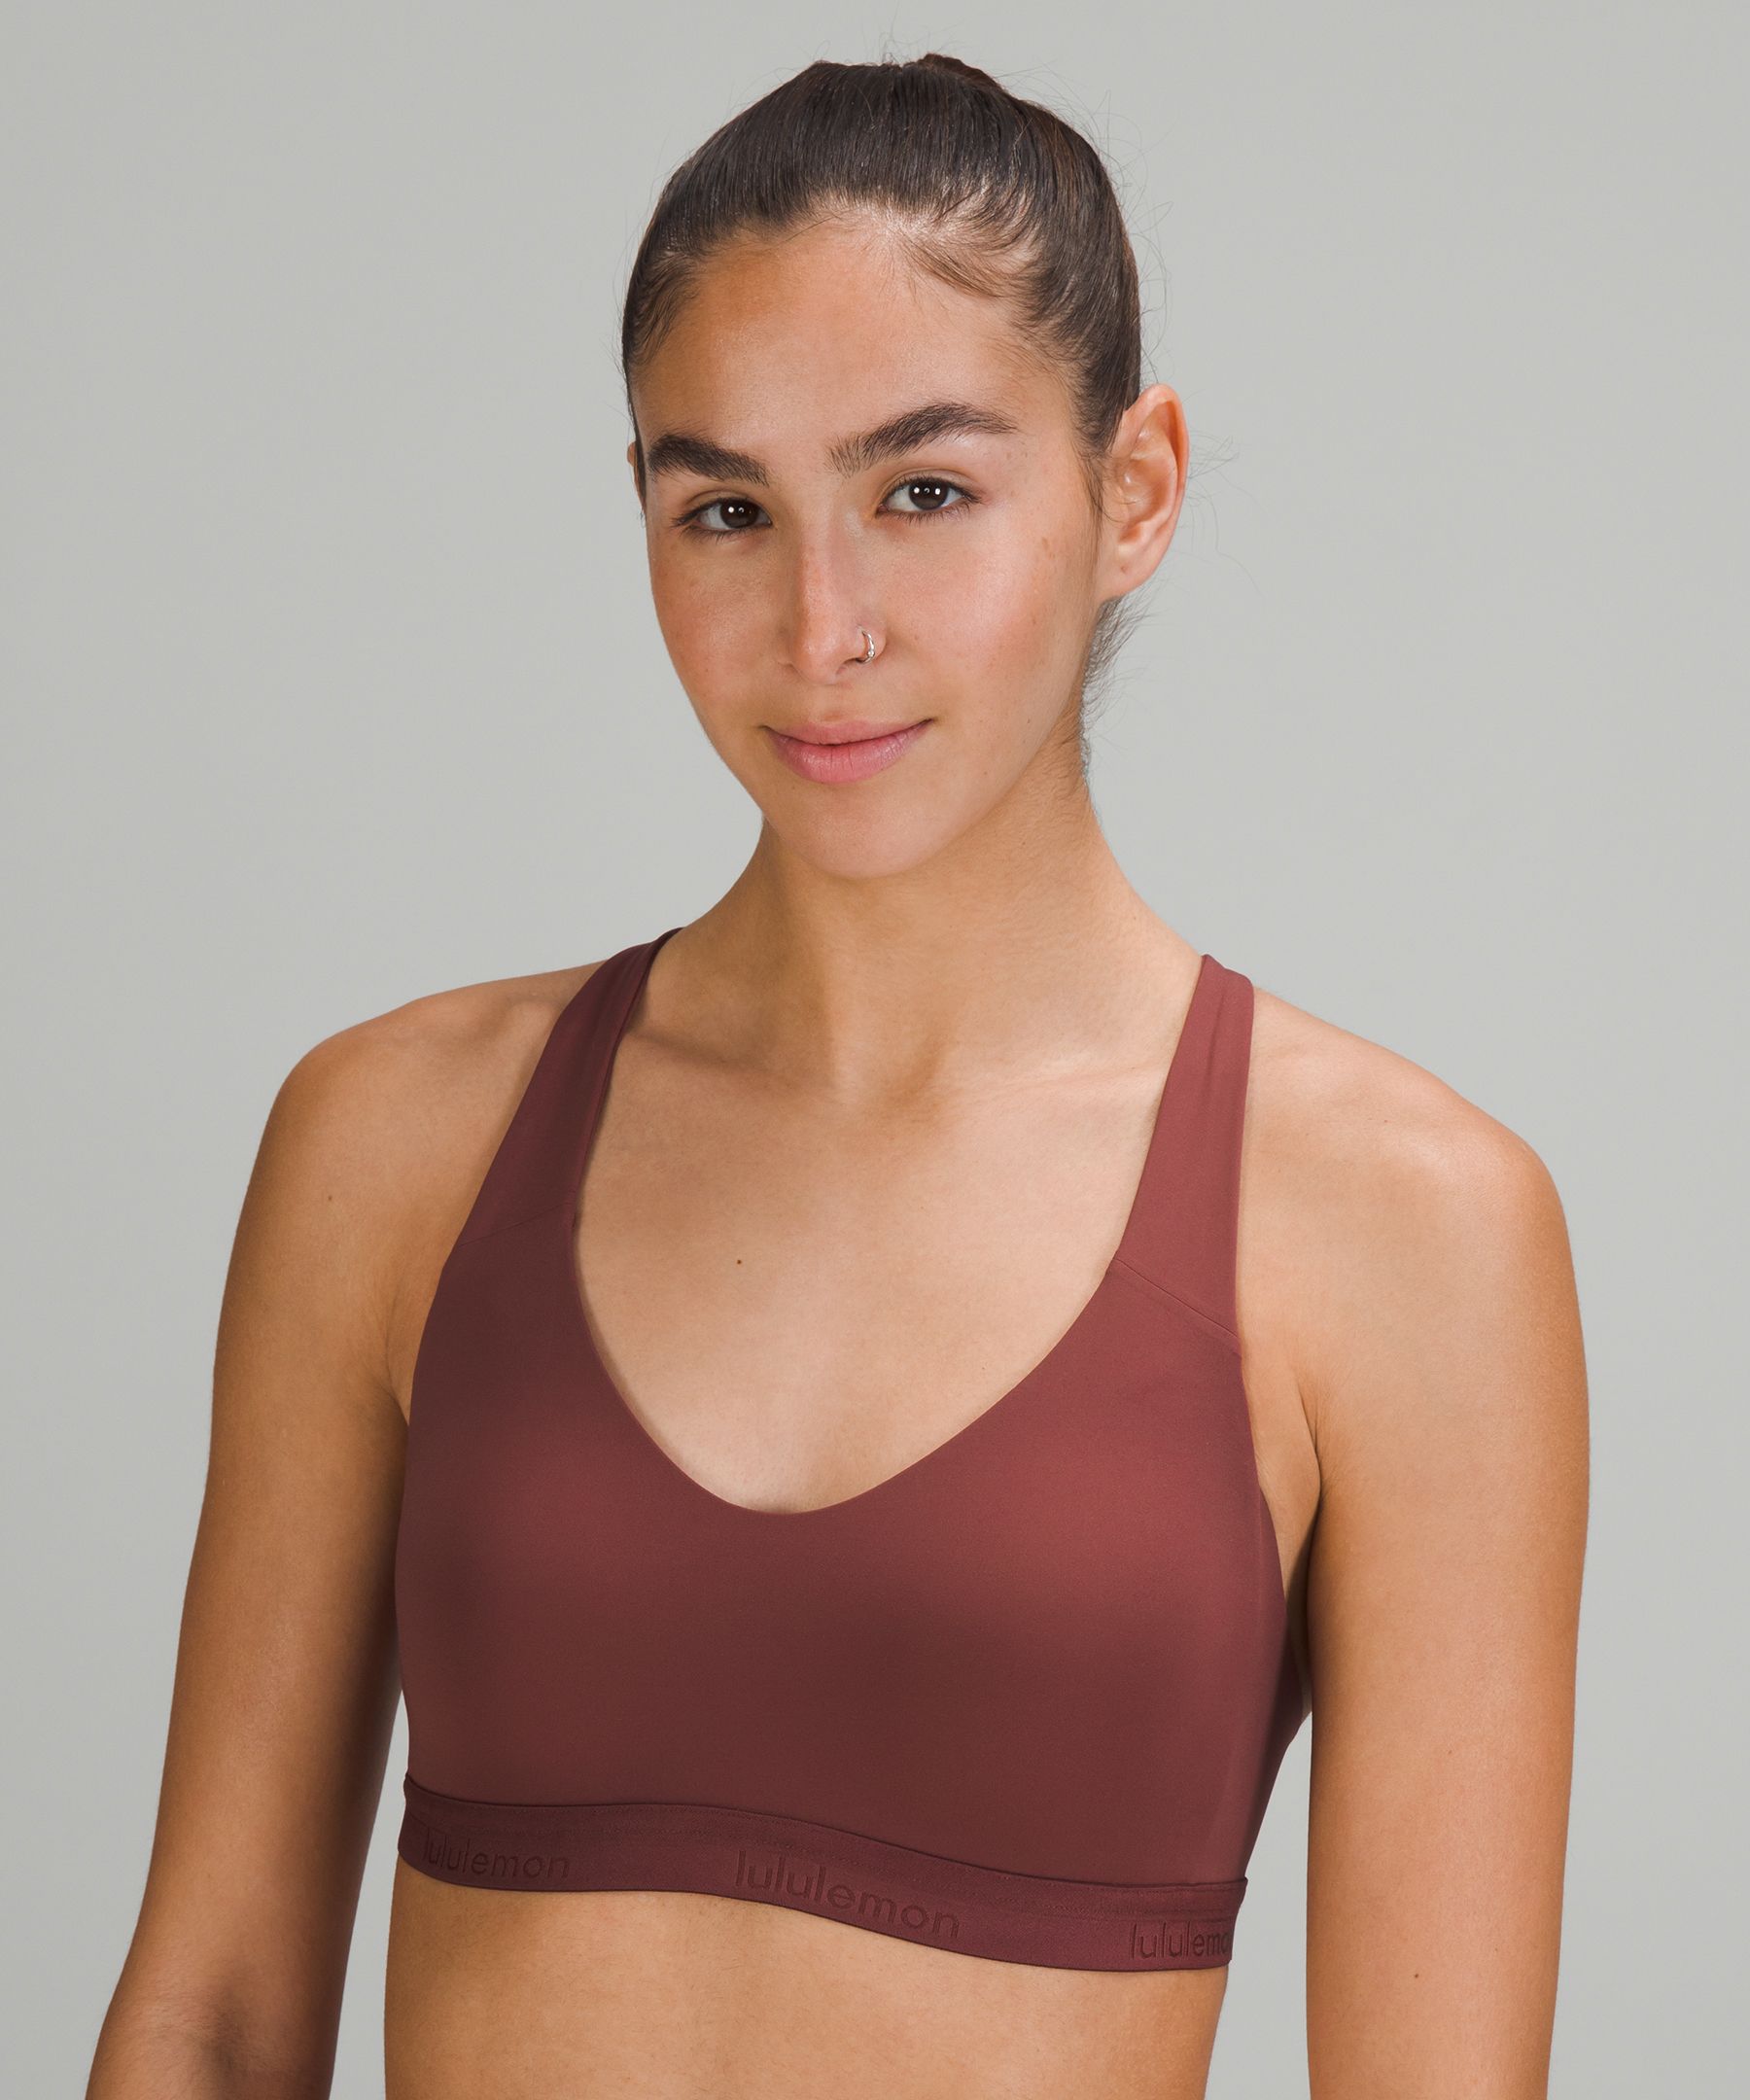 Lululemon Speed Up Bra *High Support for C/D Cup DKAD Size 2 NWT $78 maroon